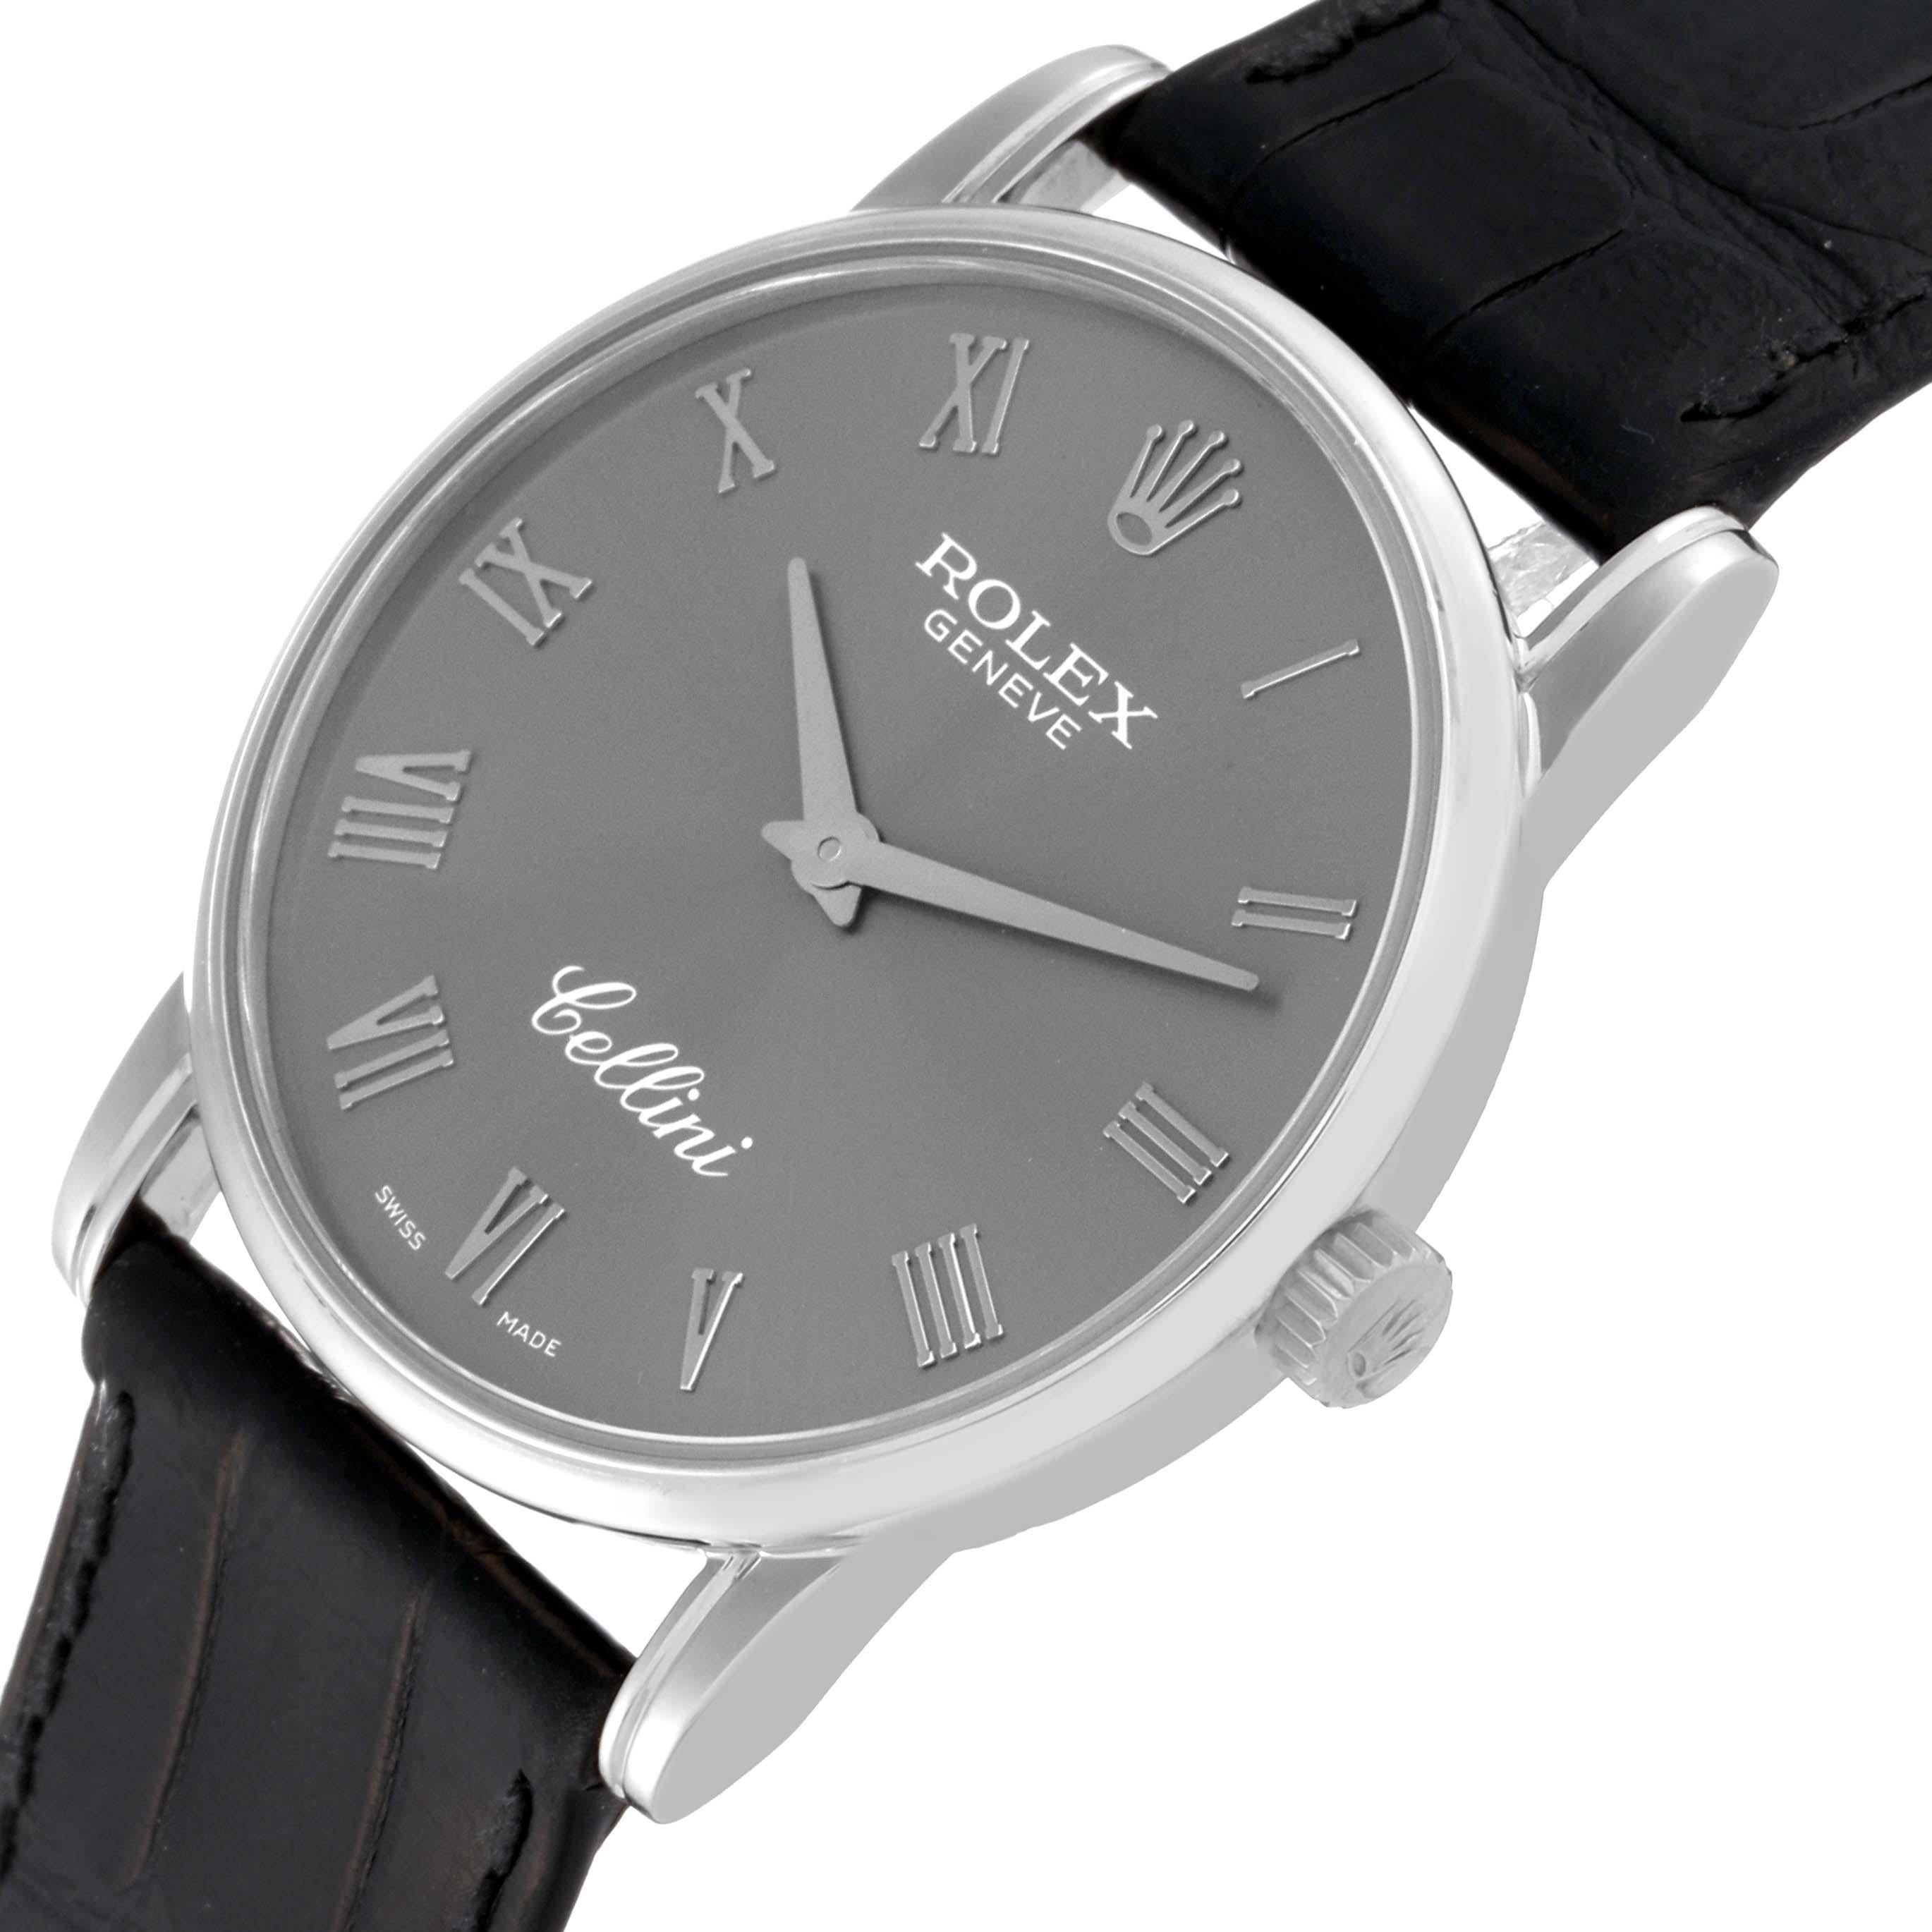 Rolex Cellini Classic Slate Dial White Gold Mens Watch 5116 Papers. Manual winding movement. 18k white gold slim case 31.8 mm in diameter. Rolex logo on the crown. . Scratch resistant sapphire crystal. Flat profile. Slate grey dial with raised white